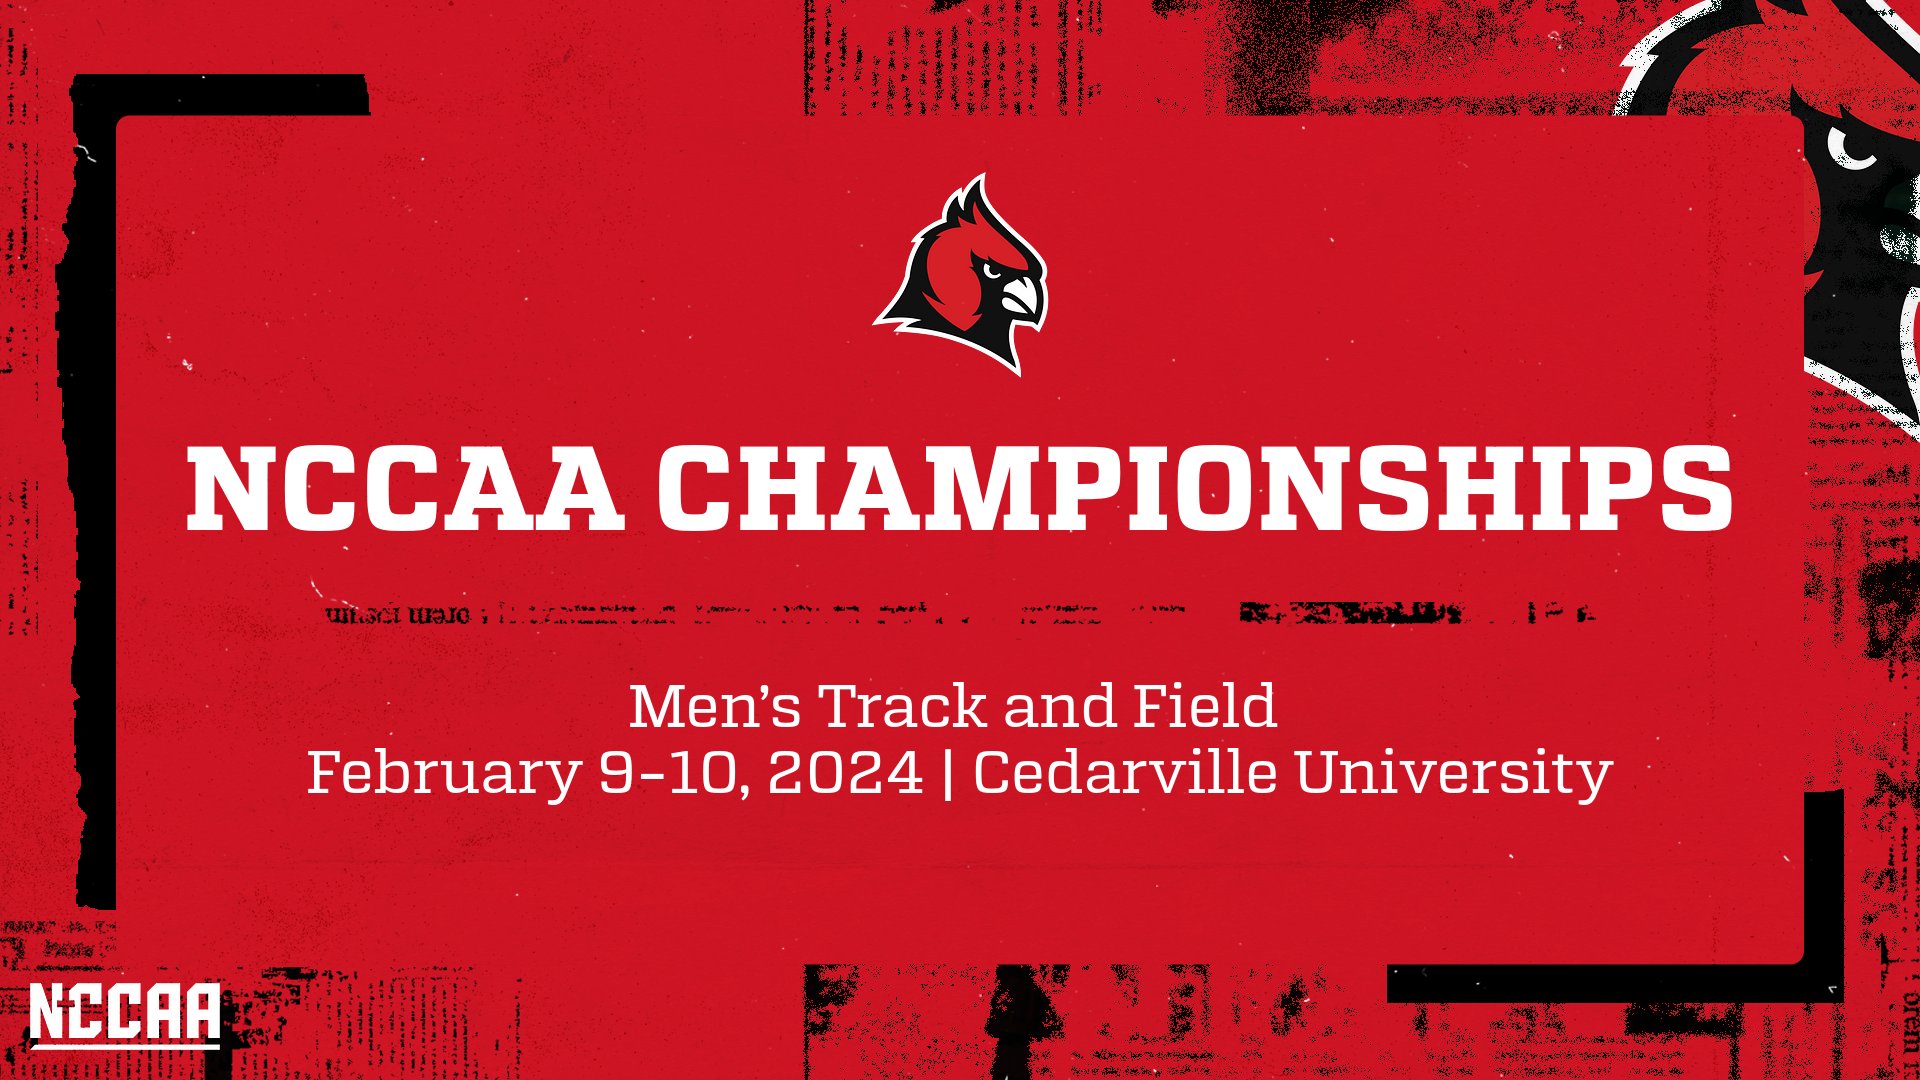 NCCAA CHAMPIONSHIPS: Men's Track and Field ready to compete at the NCCAA Championships